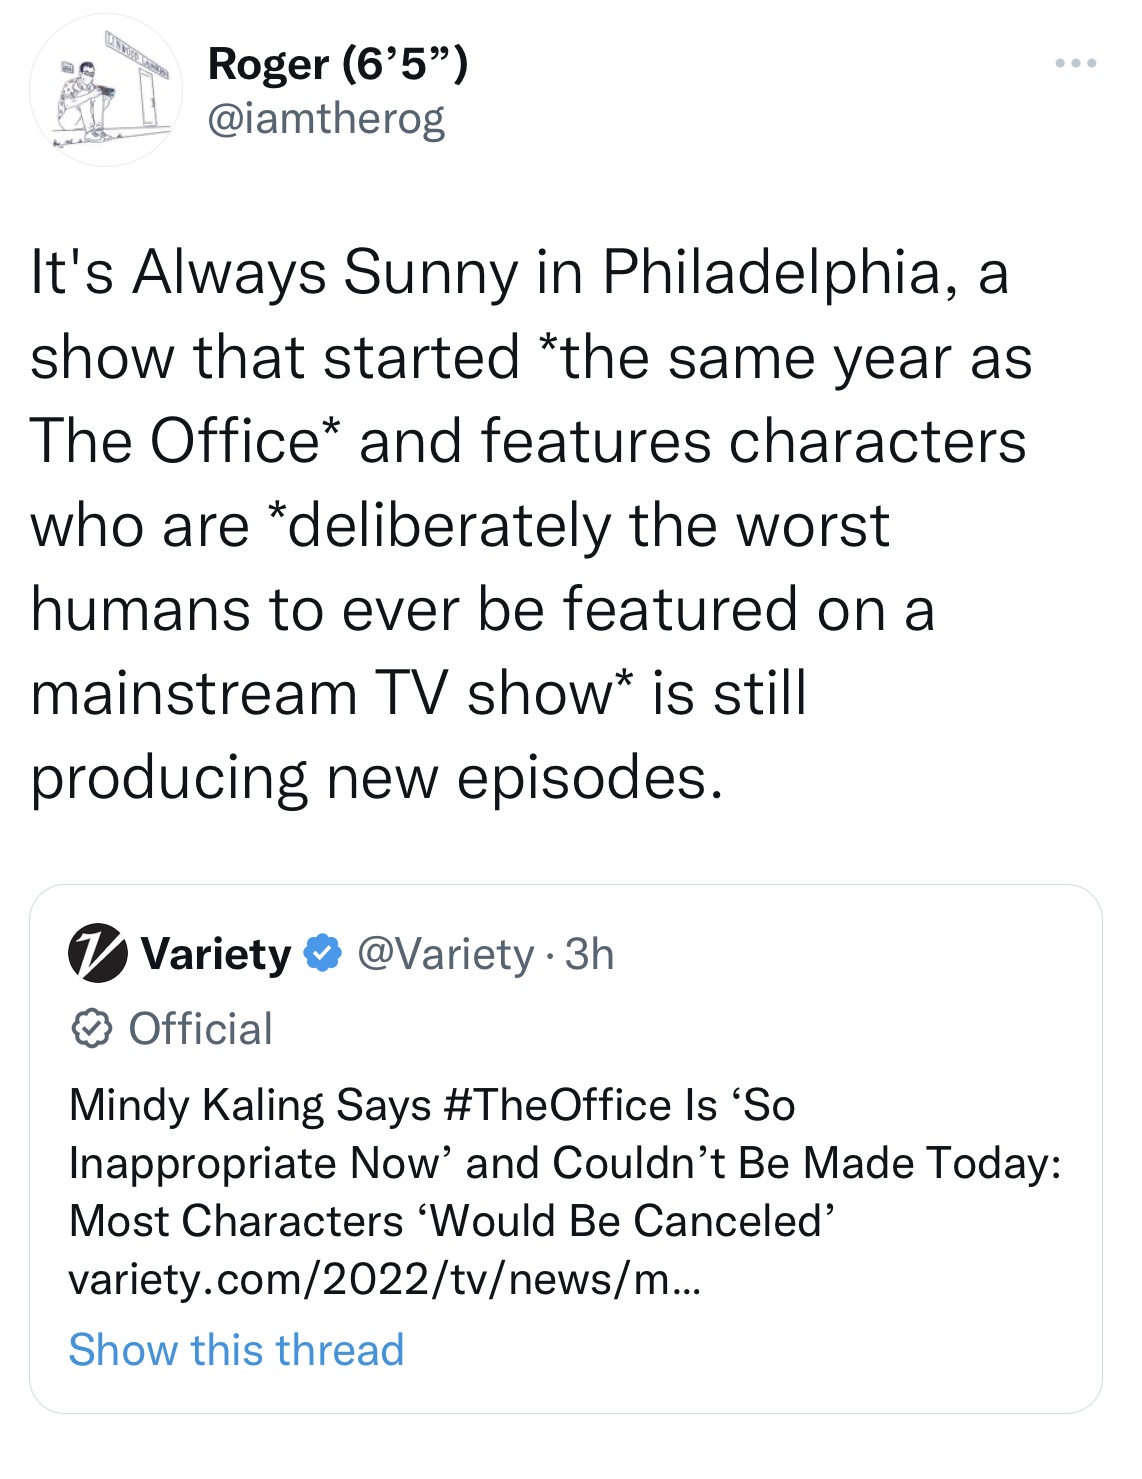 tweets roasting celebs - Inflammation - Roger 6'5" It's Always Sunny in Philadelphia, a show that started the same year as The Office and features characters who are deliberately the worst humans to ever be featured on a mainstream Tv show is still produc